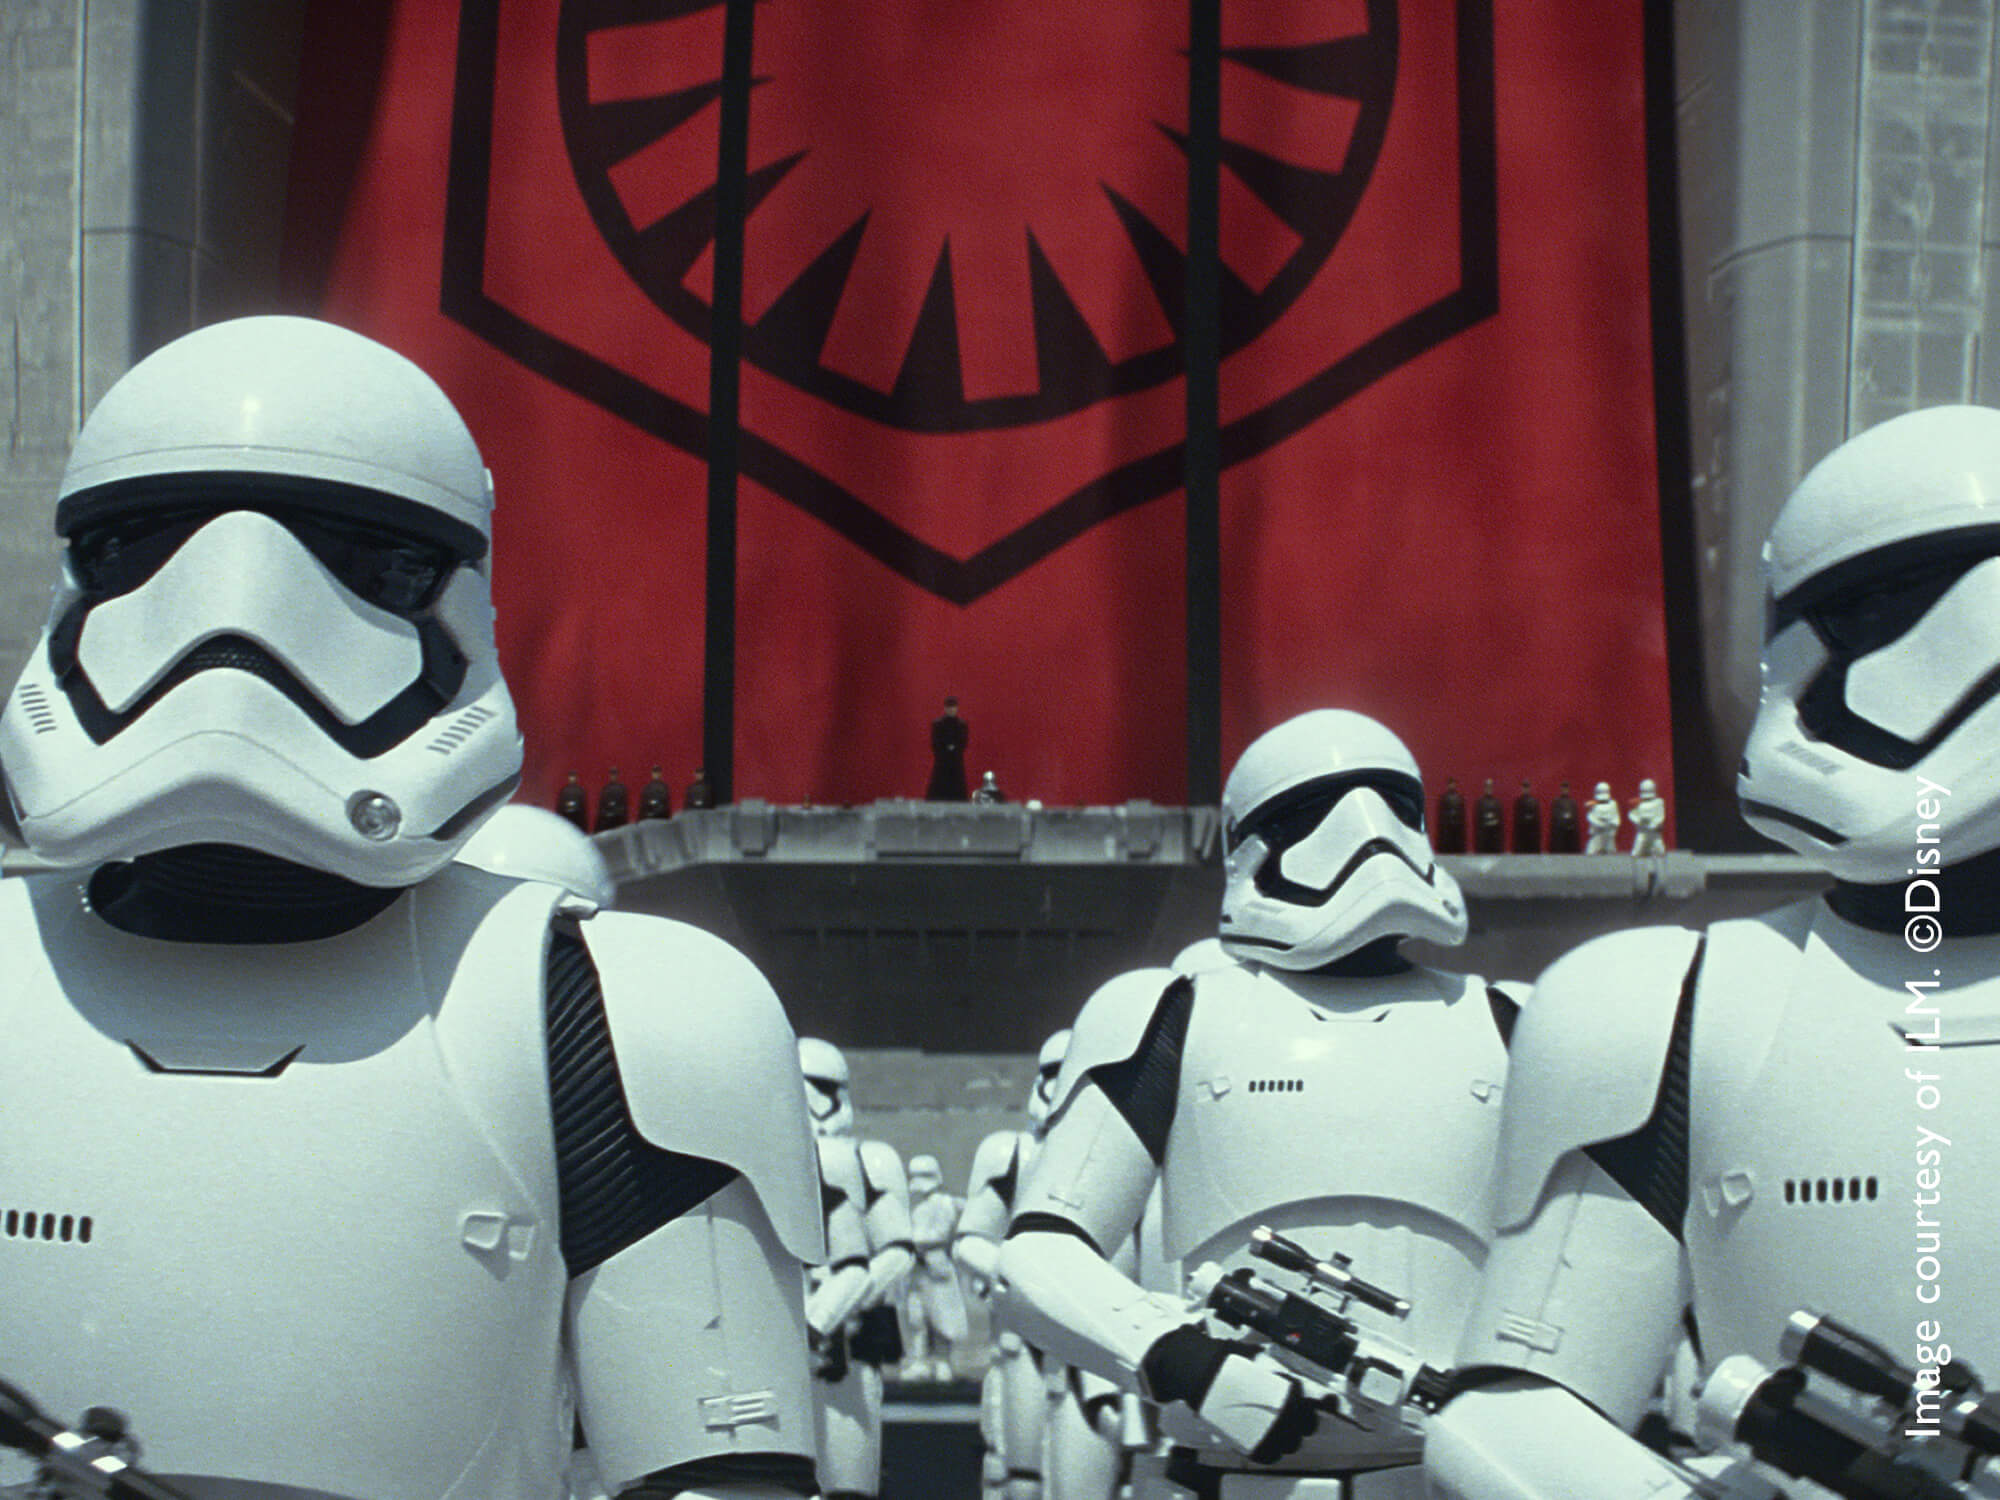 Star Wars stormtroopers standing in formation with red curtain in background